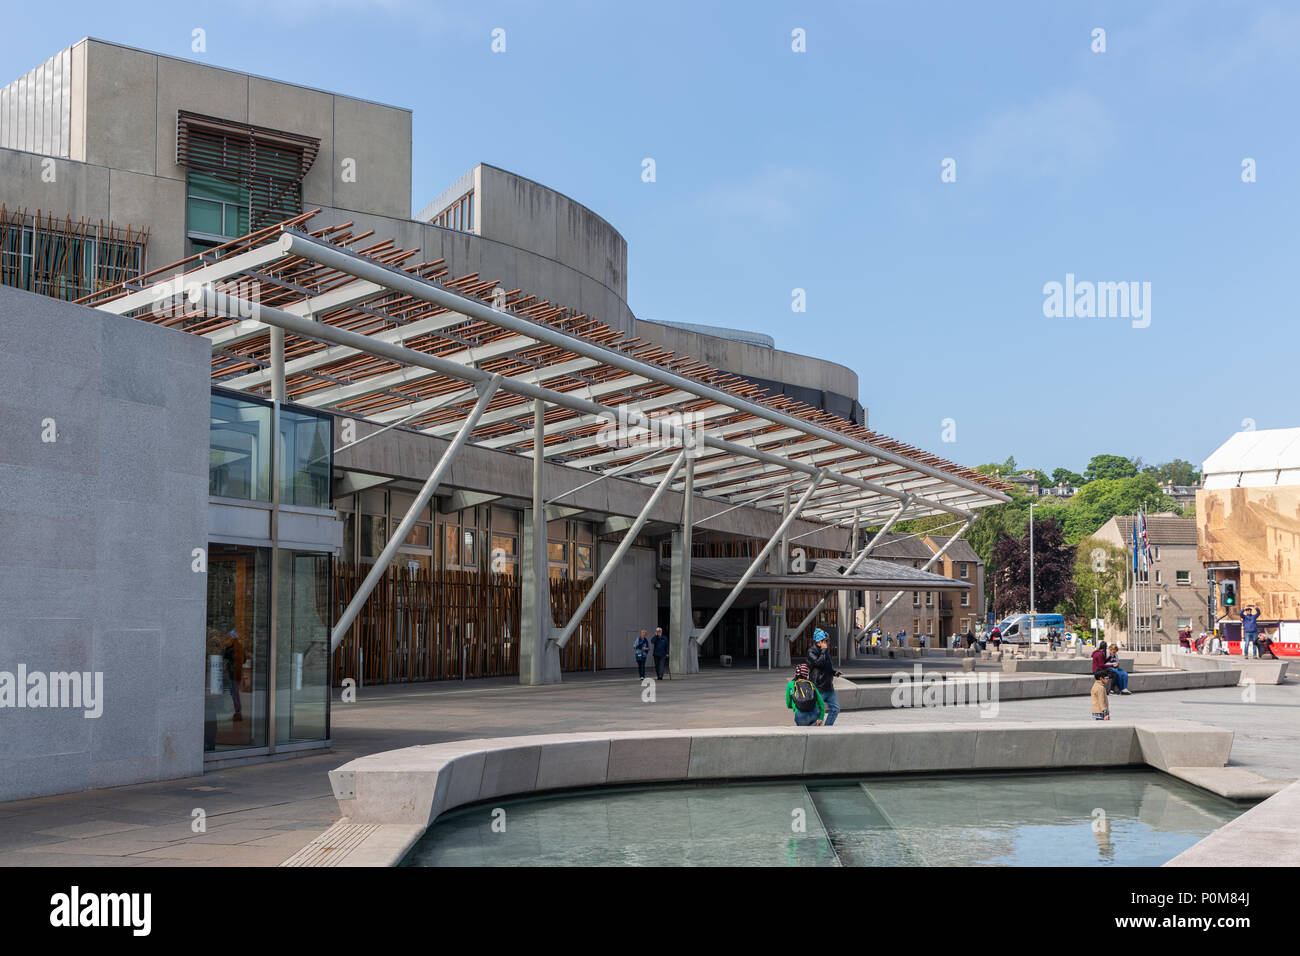 Square with pond in front of Scottish Parliament building Edinburgh. Stock Photo